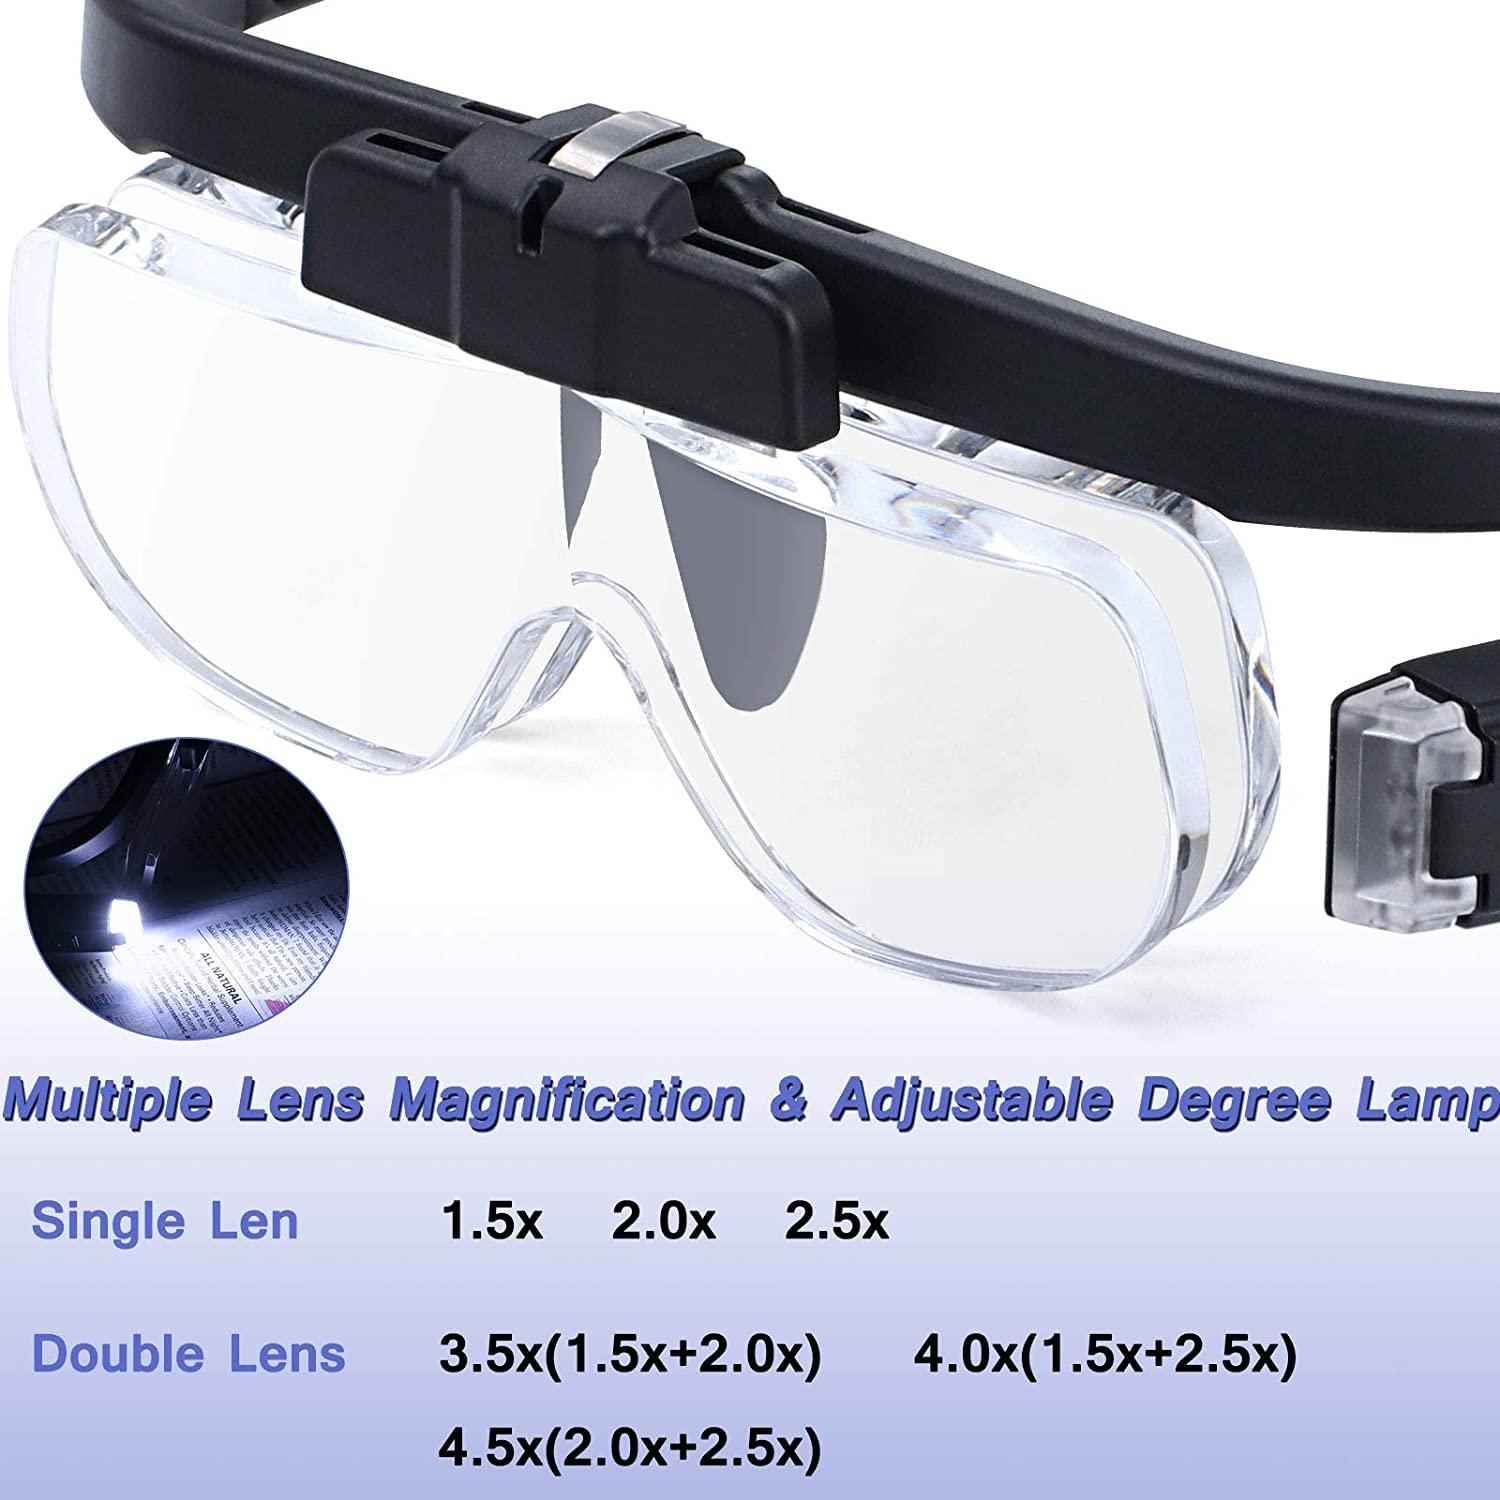 Magnifying Glass with Bright LED Lights- 2.5X, 5X, 16X Handheld